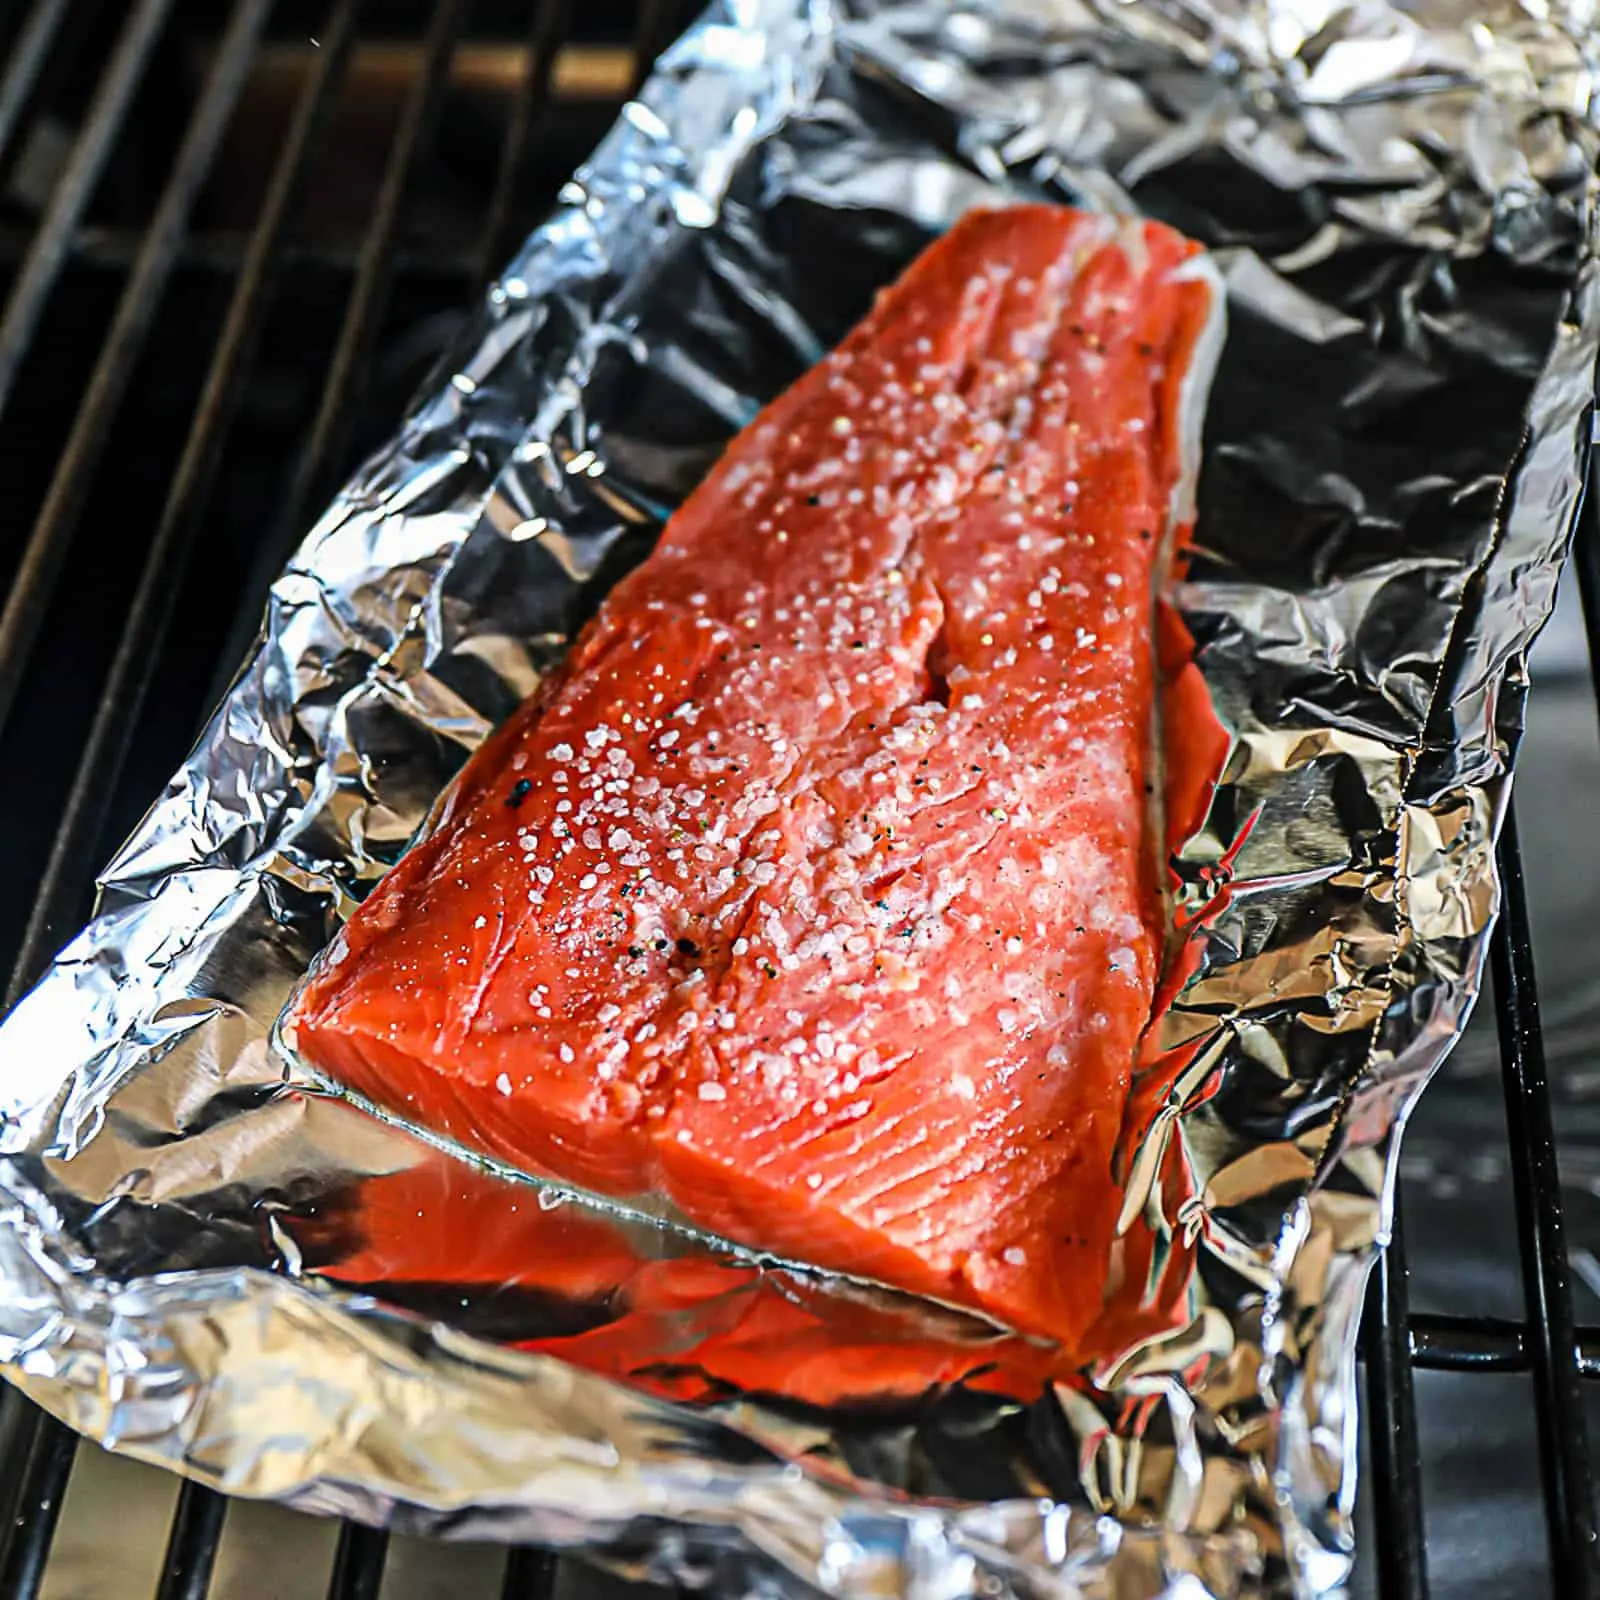 smoked salmon in foil - Is it better to cook salmon in foil or not